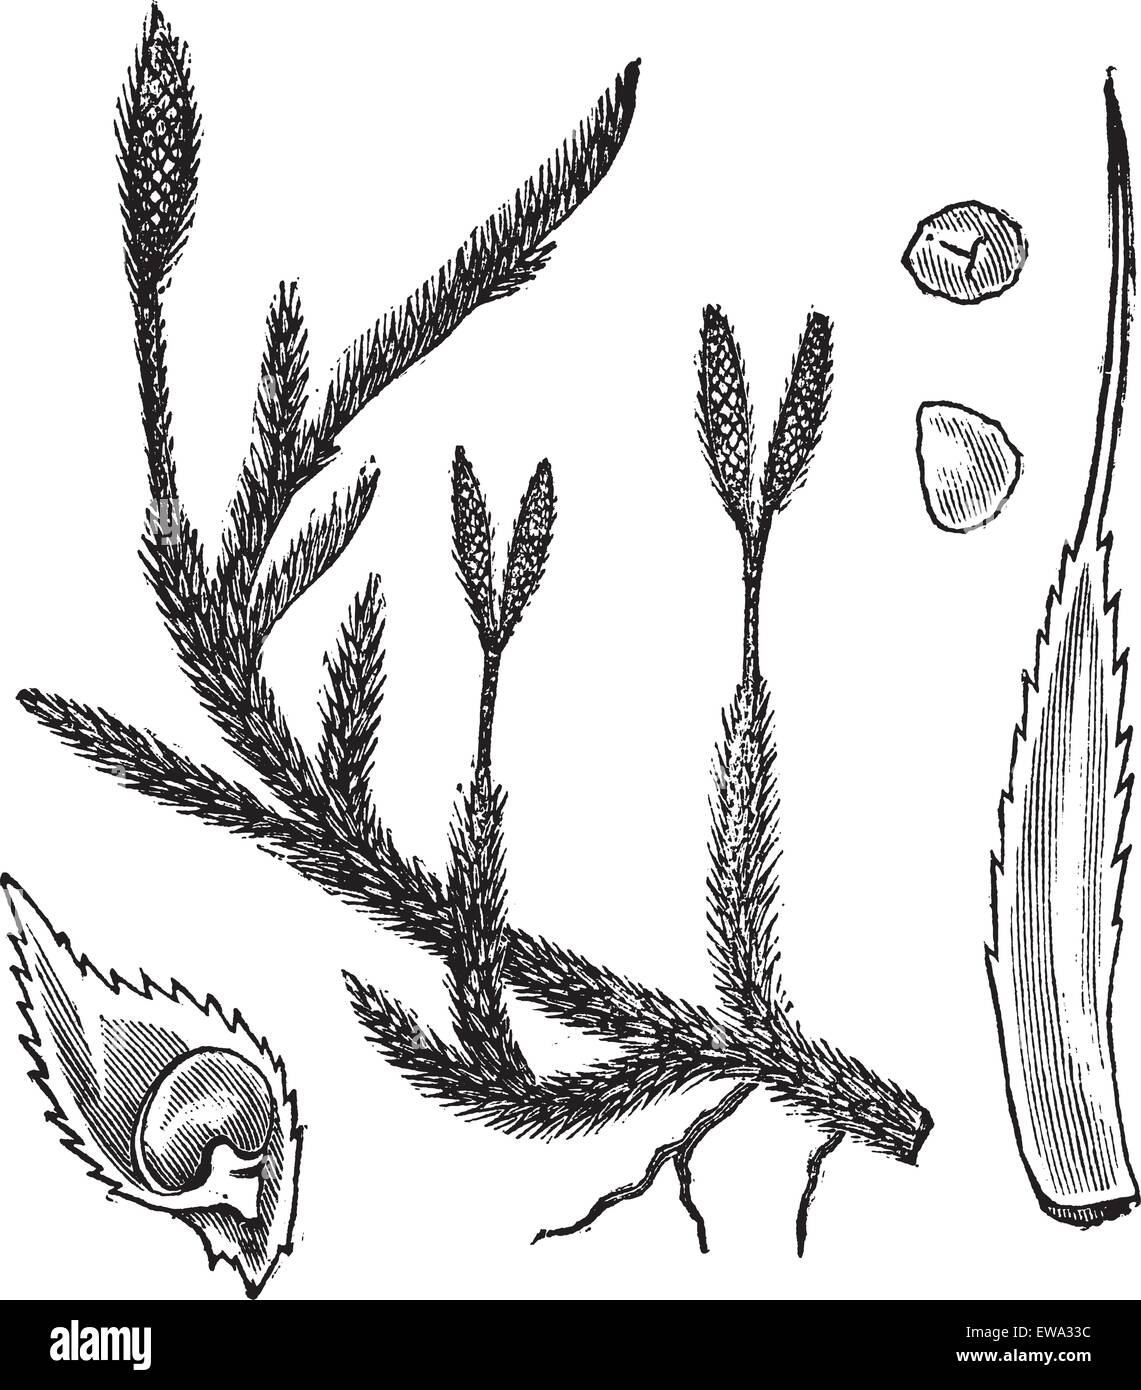 Common clubmoss or Lycopodium clavatum or Wolf's-foot clubmoss or Stag's-horn clubmoss or Groundpine or  Wolfpaw clubmoss or Foxtail clubmoss or Running clubmoss or Running ground-pine or Running pine or Running moss or  Princess Pine, vintage engraving. Old engraved illustration of Common clubmoss isolated on a white background. Stock Vector